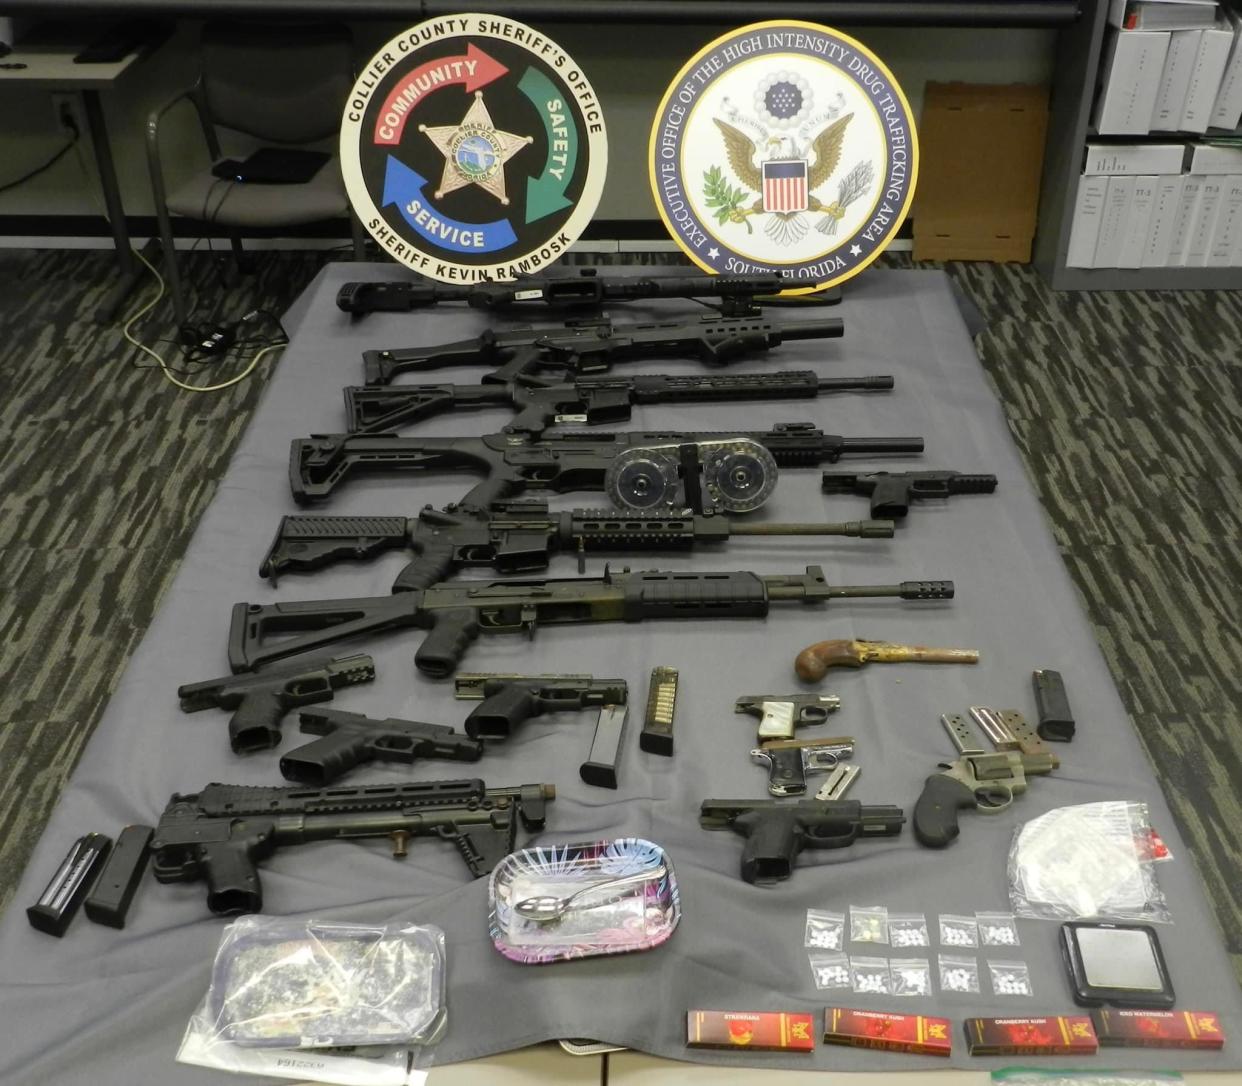 A search warrant served Friday at Yoslan Jimenez’s Naples residence resulted in the seizure of 15 firearms and more than 1,000 rounds of ammunition. Jimenez denied ownership of the guns and ammunition and they were seized by Collier County Sheriff's Office detectives.